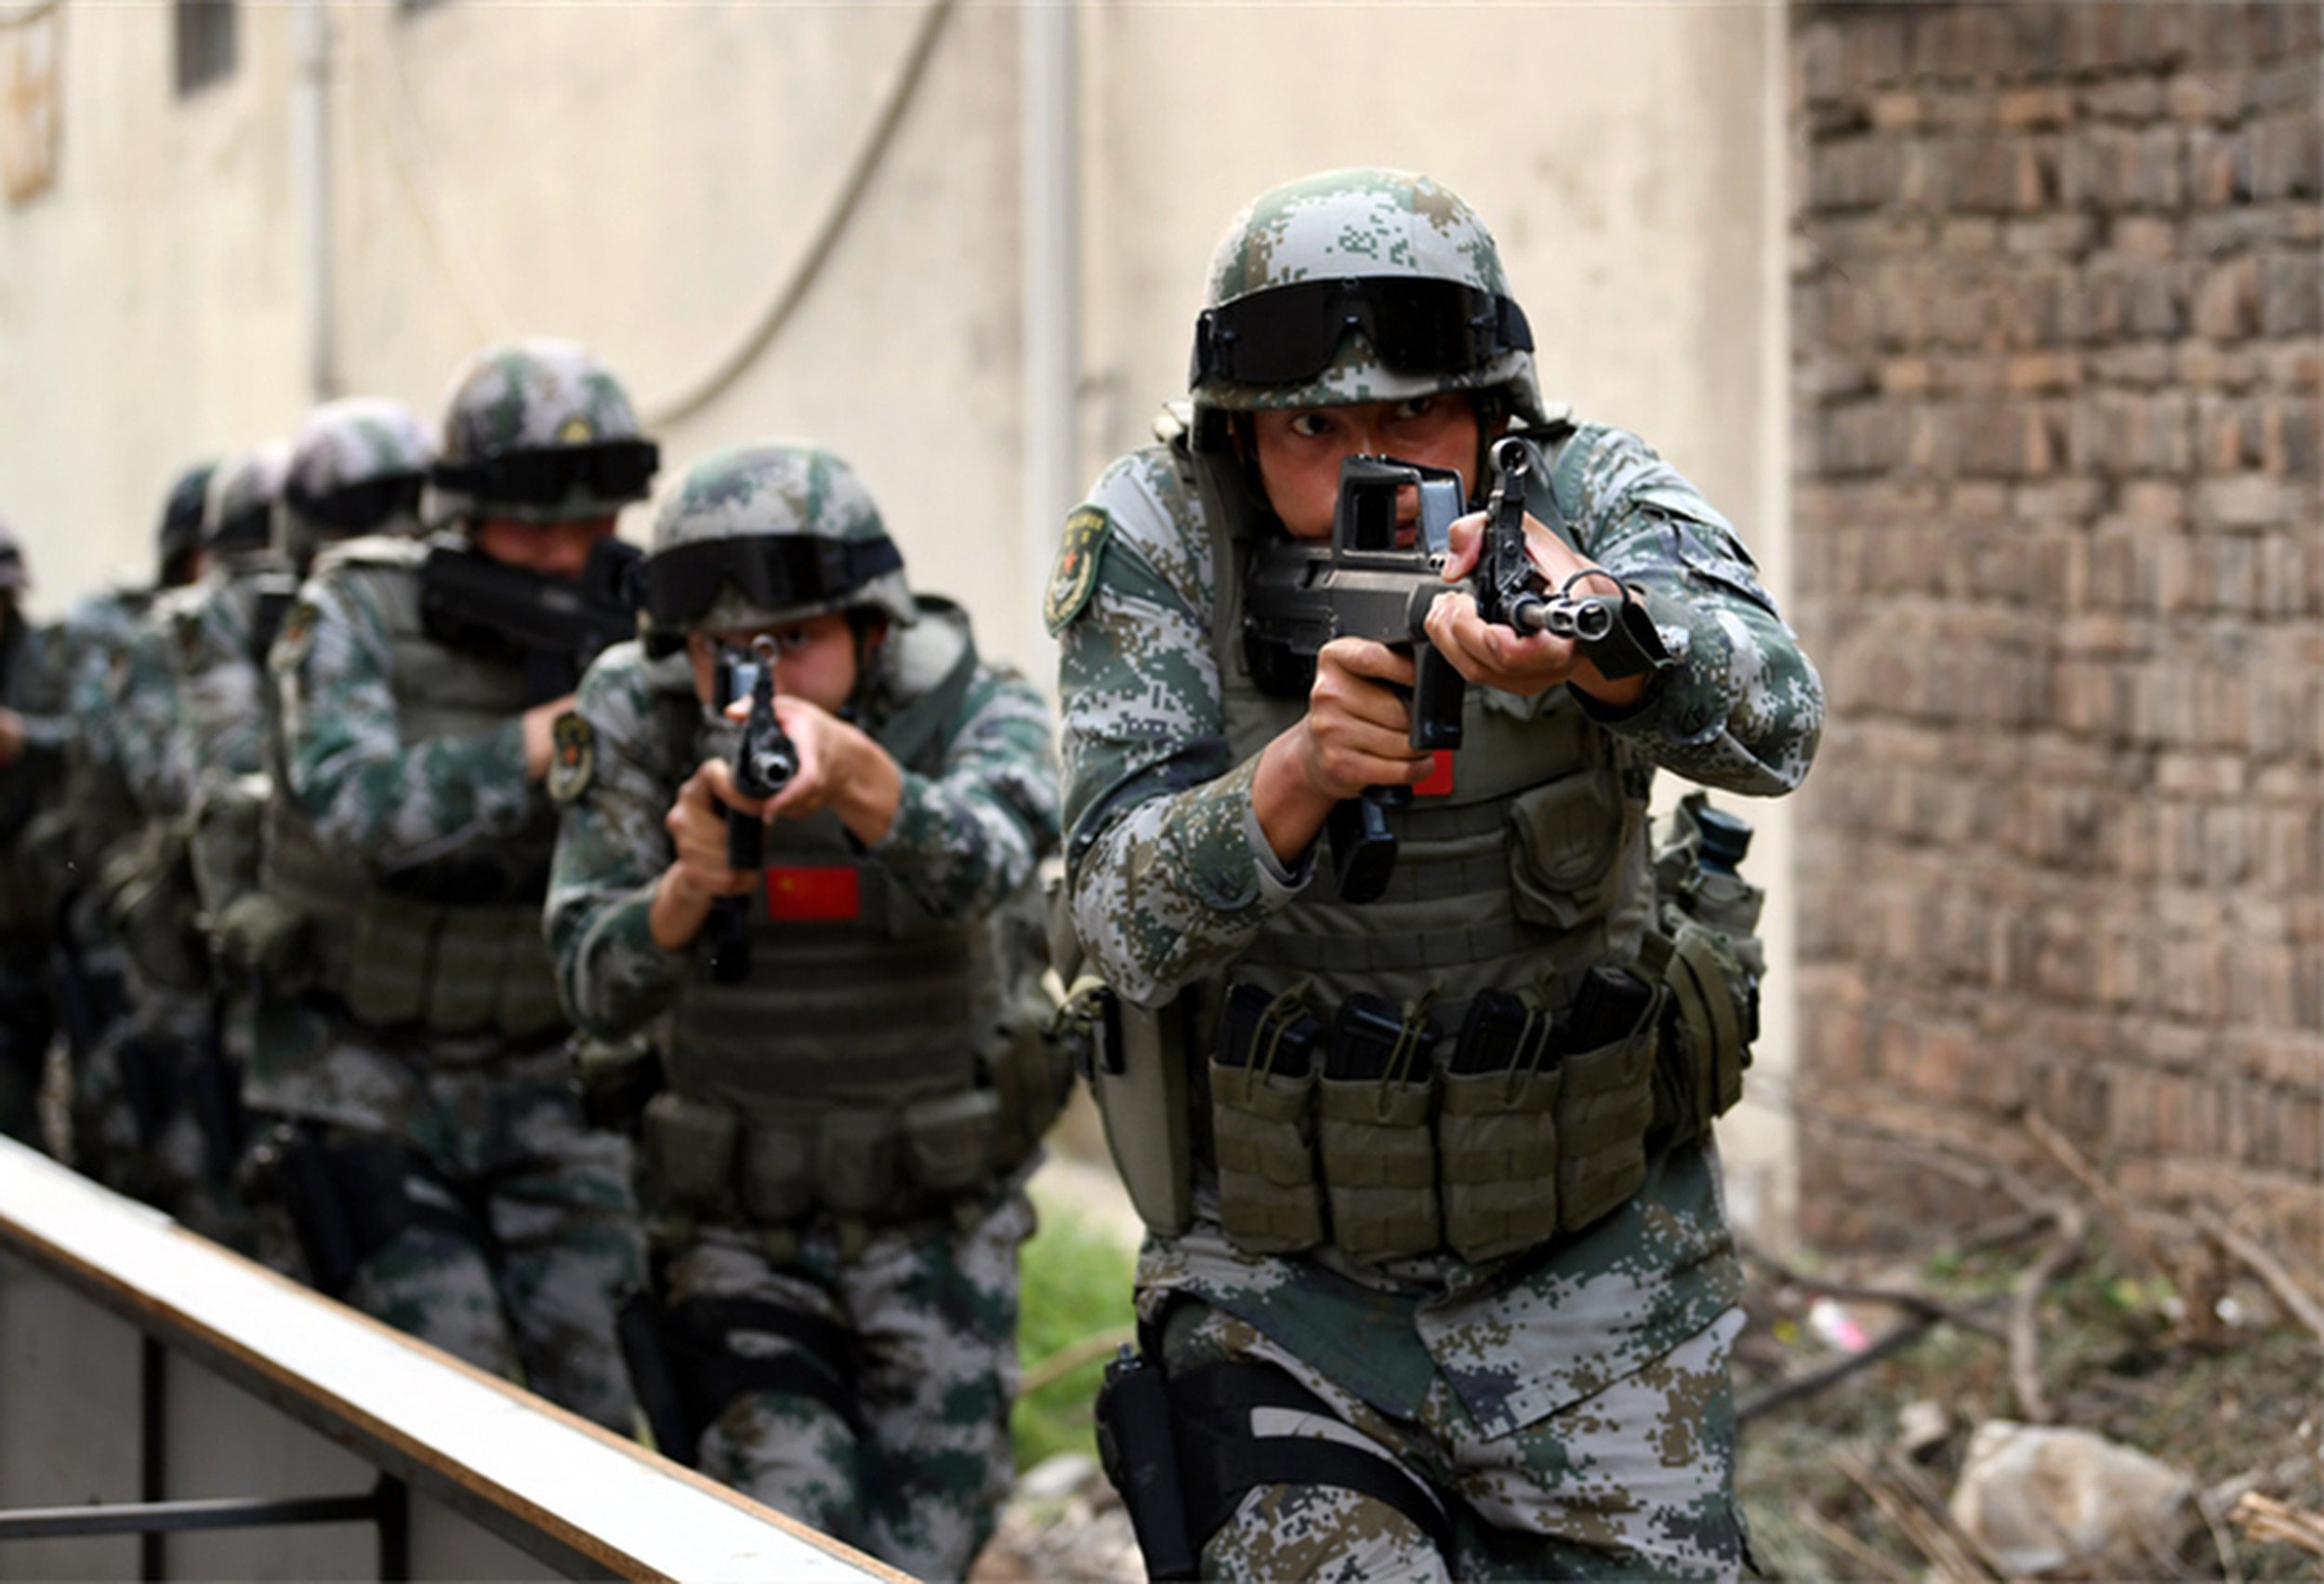 Chinese troops are confronting bigger mental challenges from technological and training demands. Photo: handout